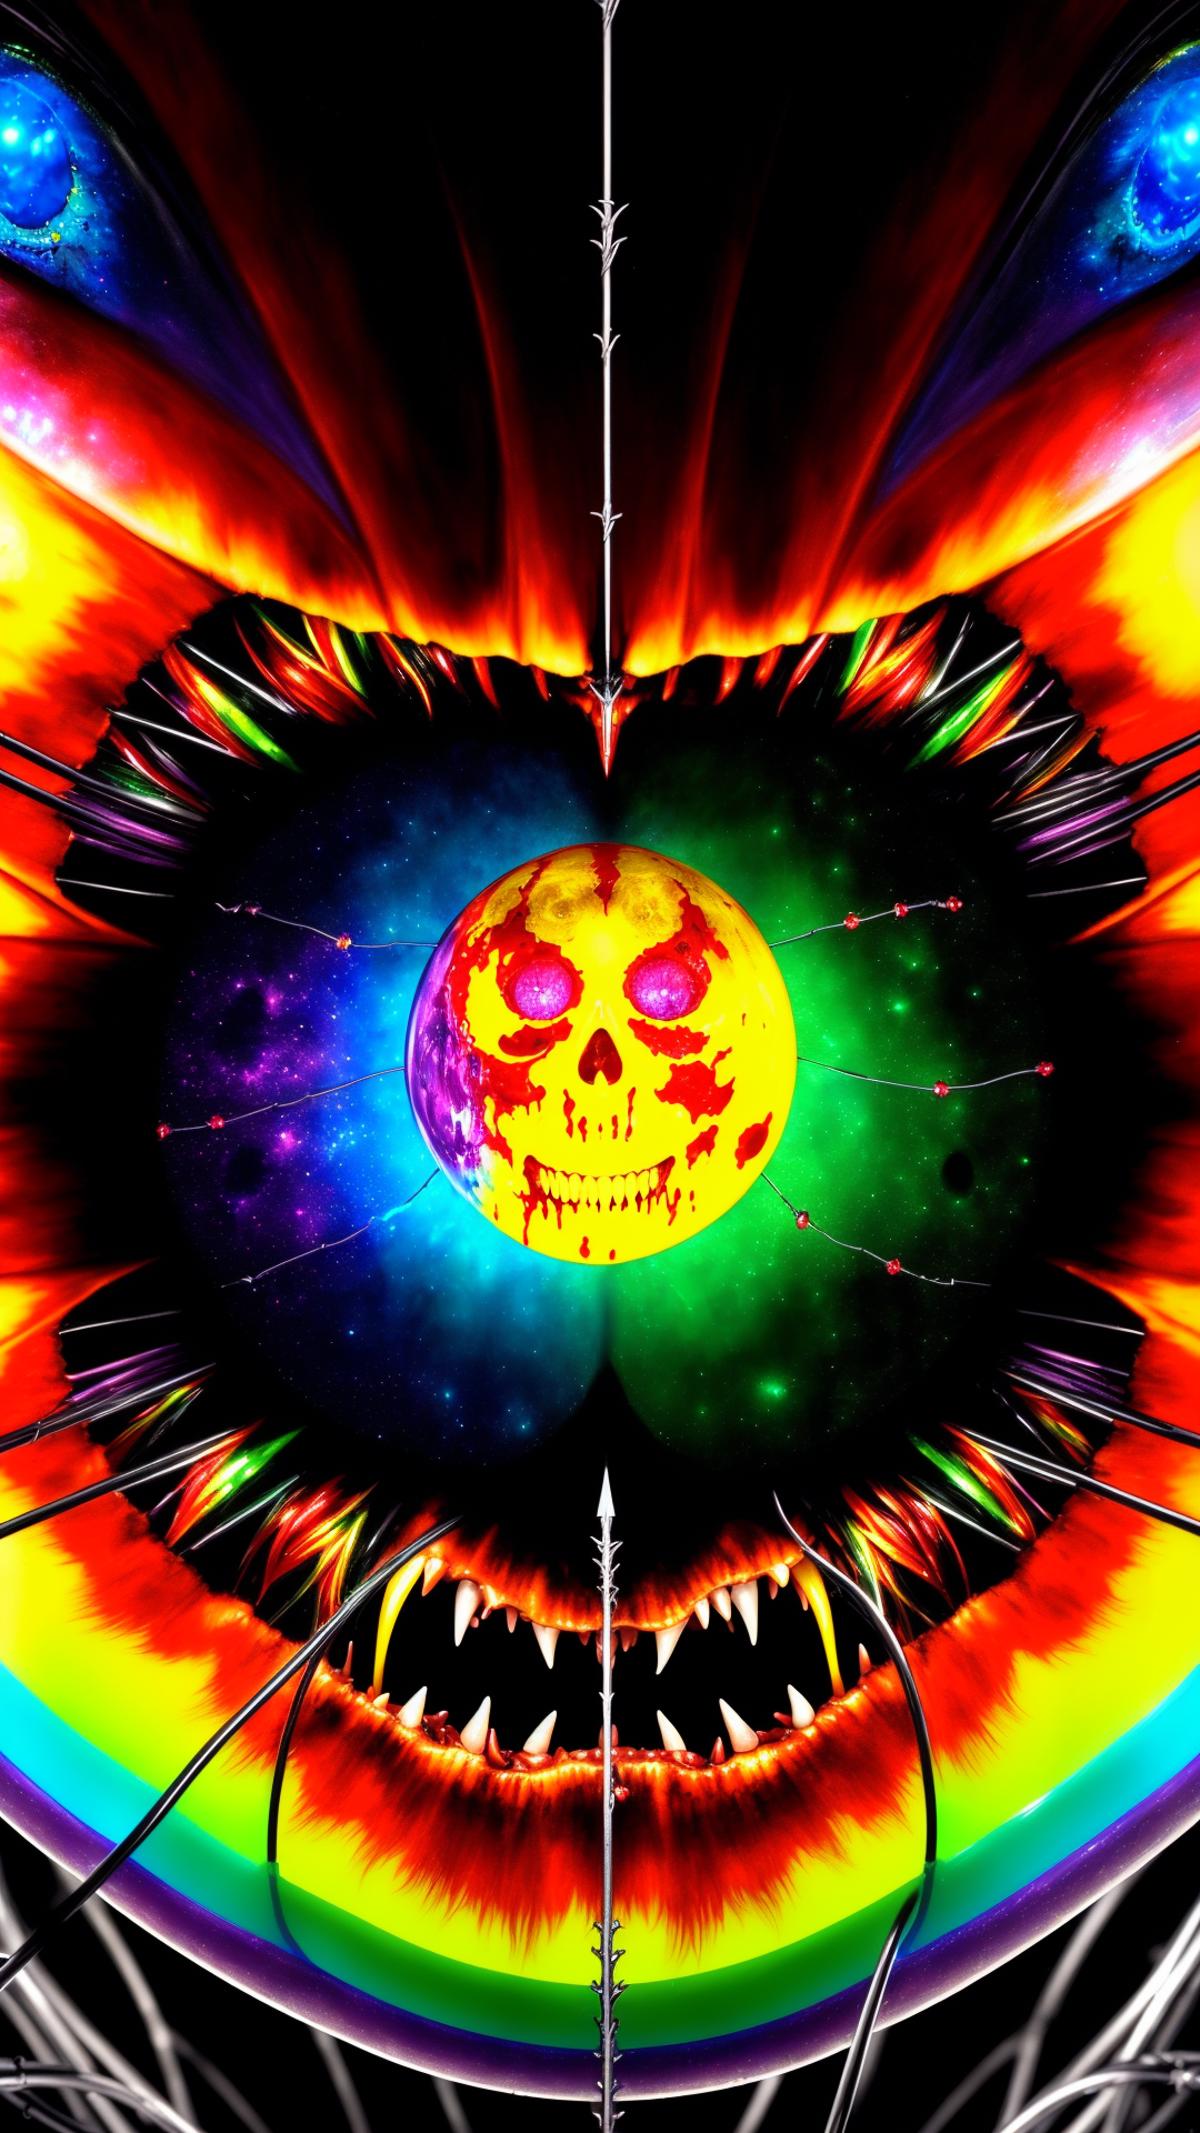 A psychedelic image of a skeleton face and a planet with purple, green, and yellow colors.